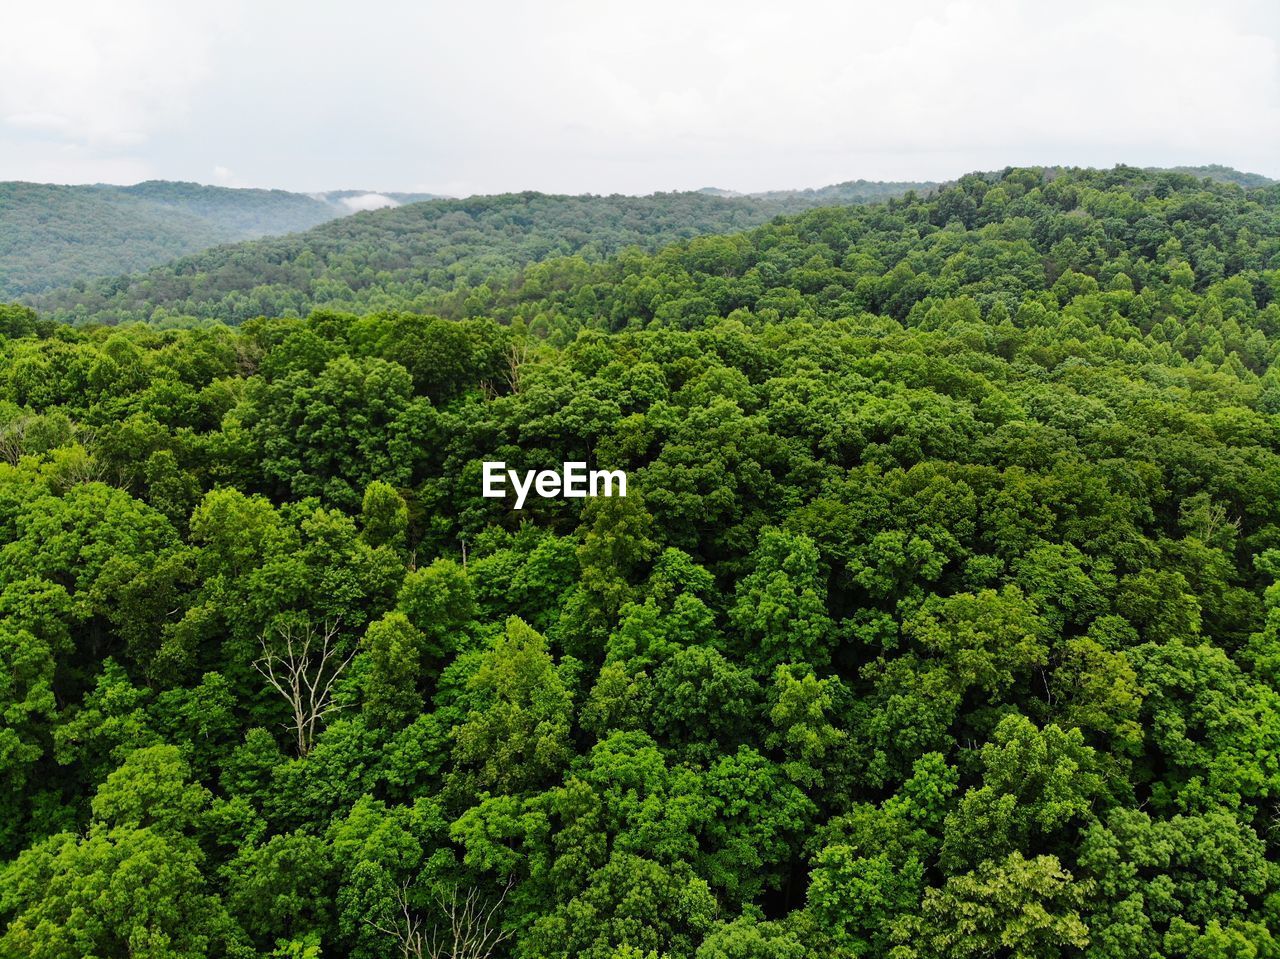 SCENIC VIEW OF TREES GROWING IN FOREST